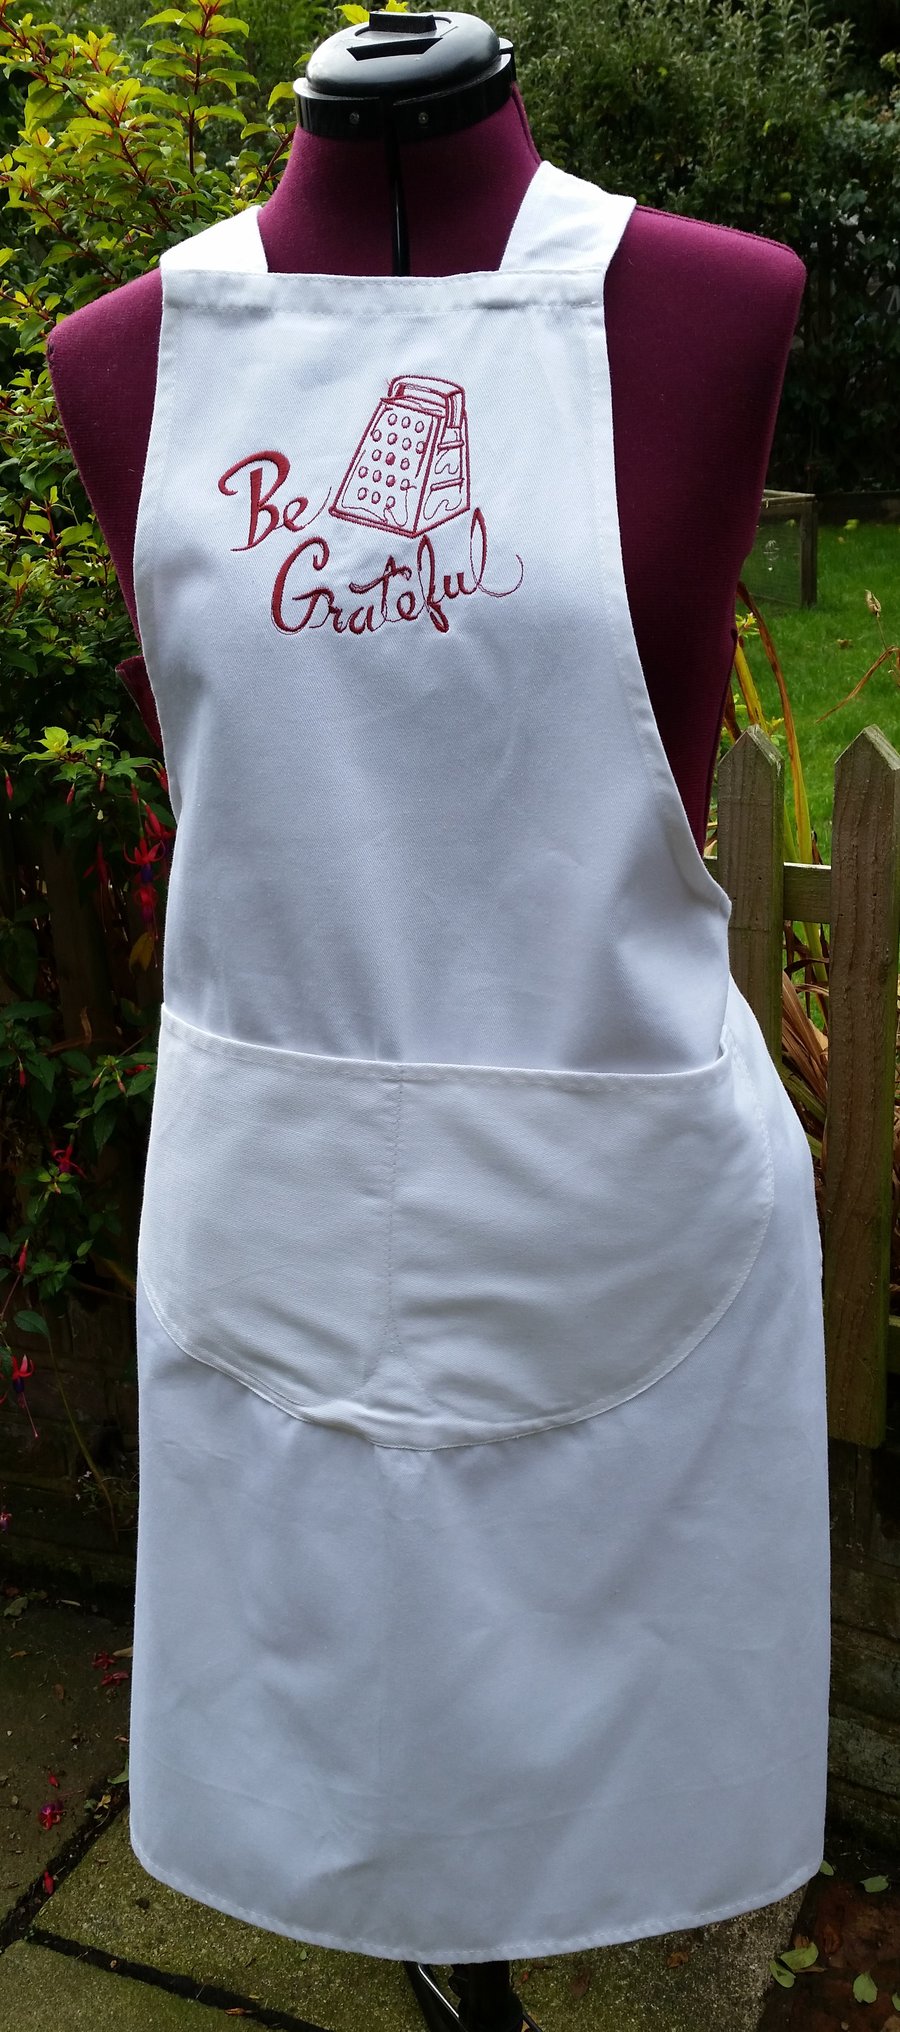 100% cotton apron with embroidered design